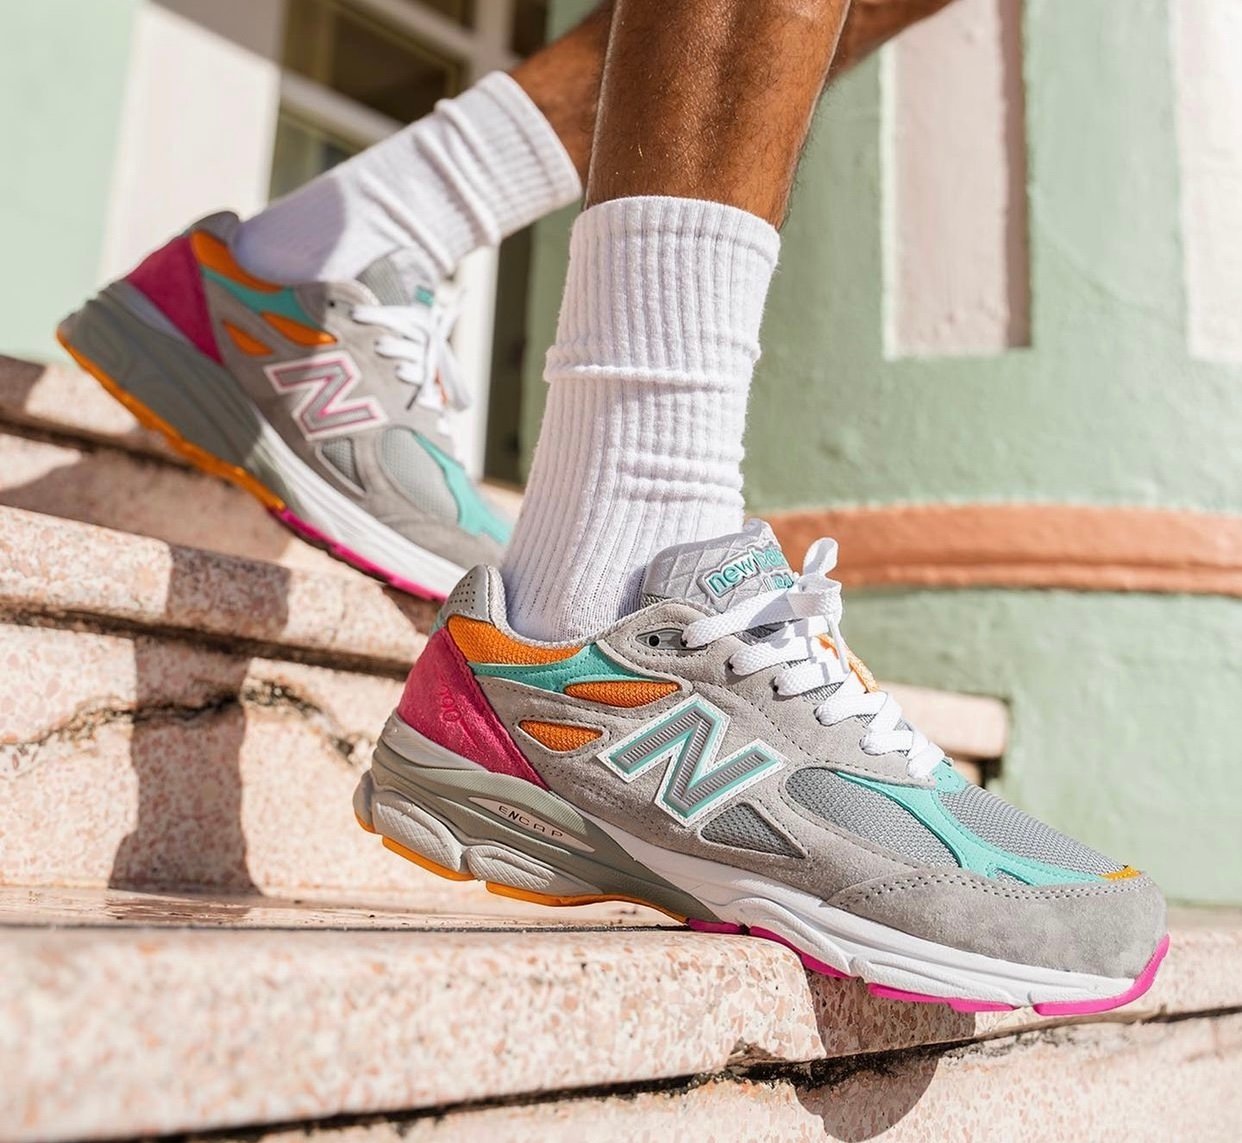 DTLR x New Balance 990v3 Miami Drive Release Date